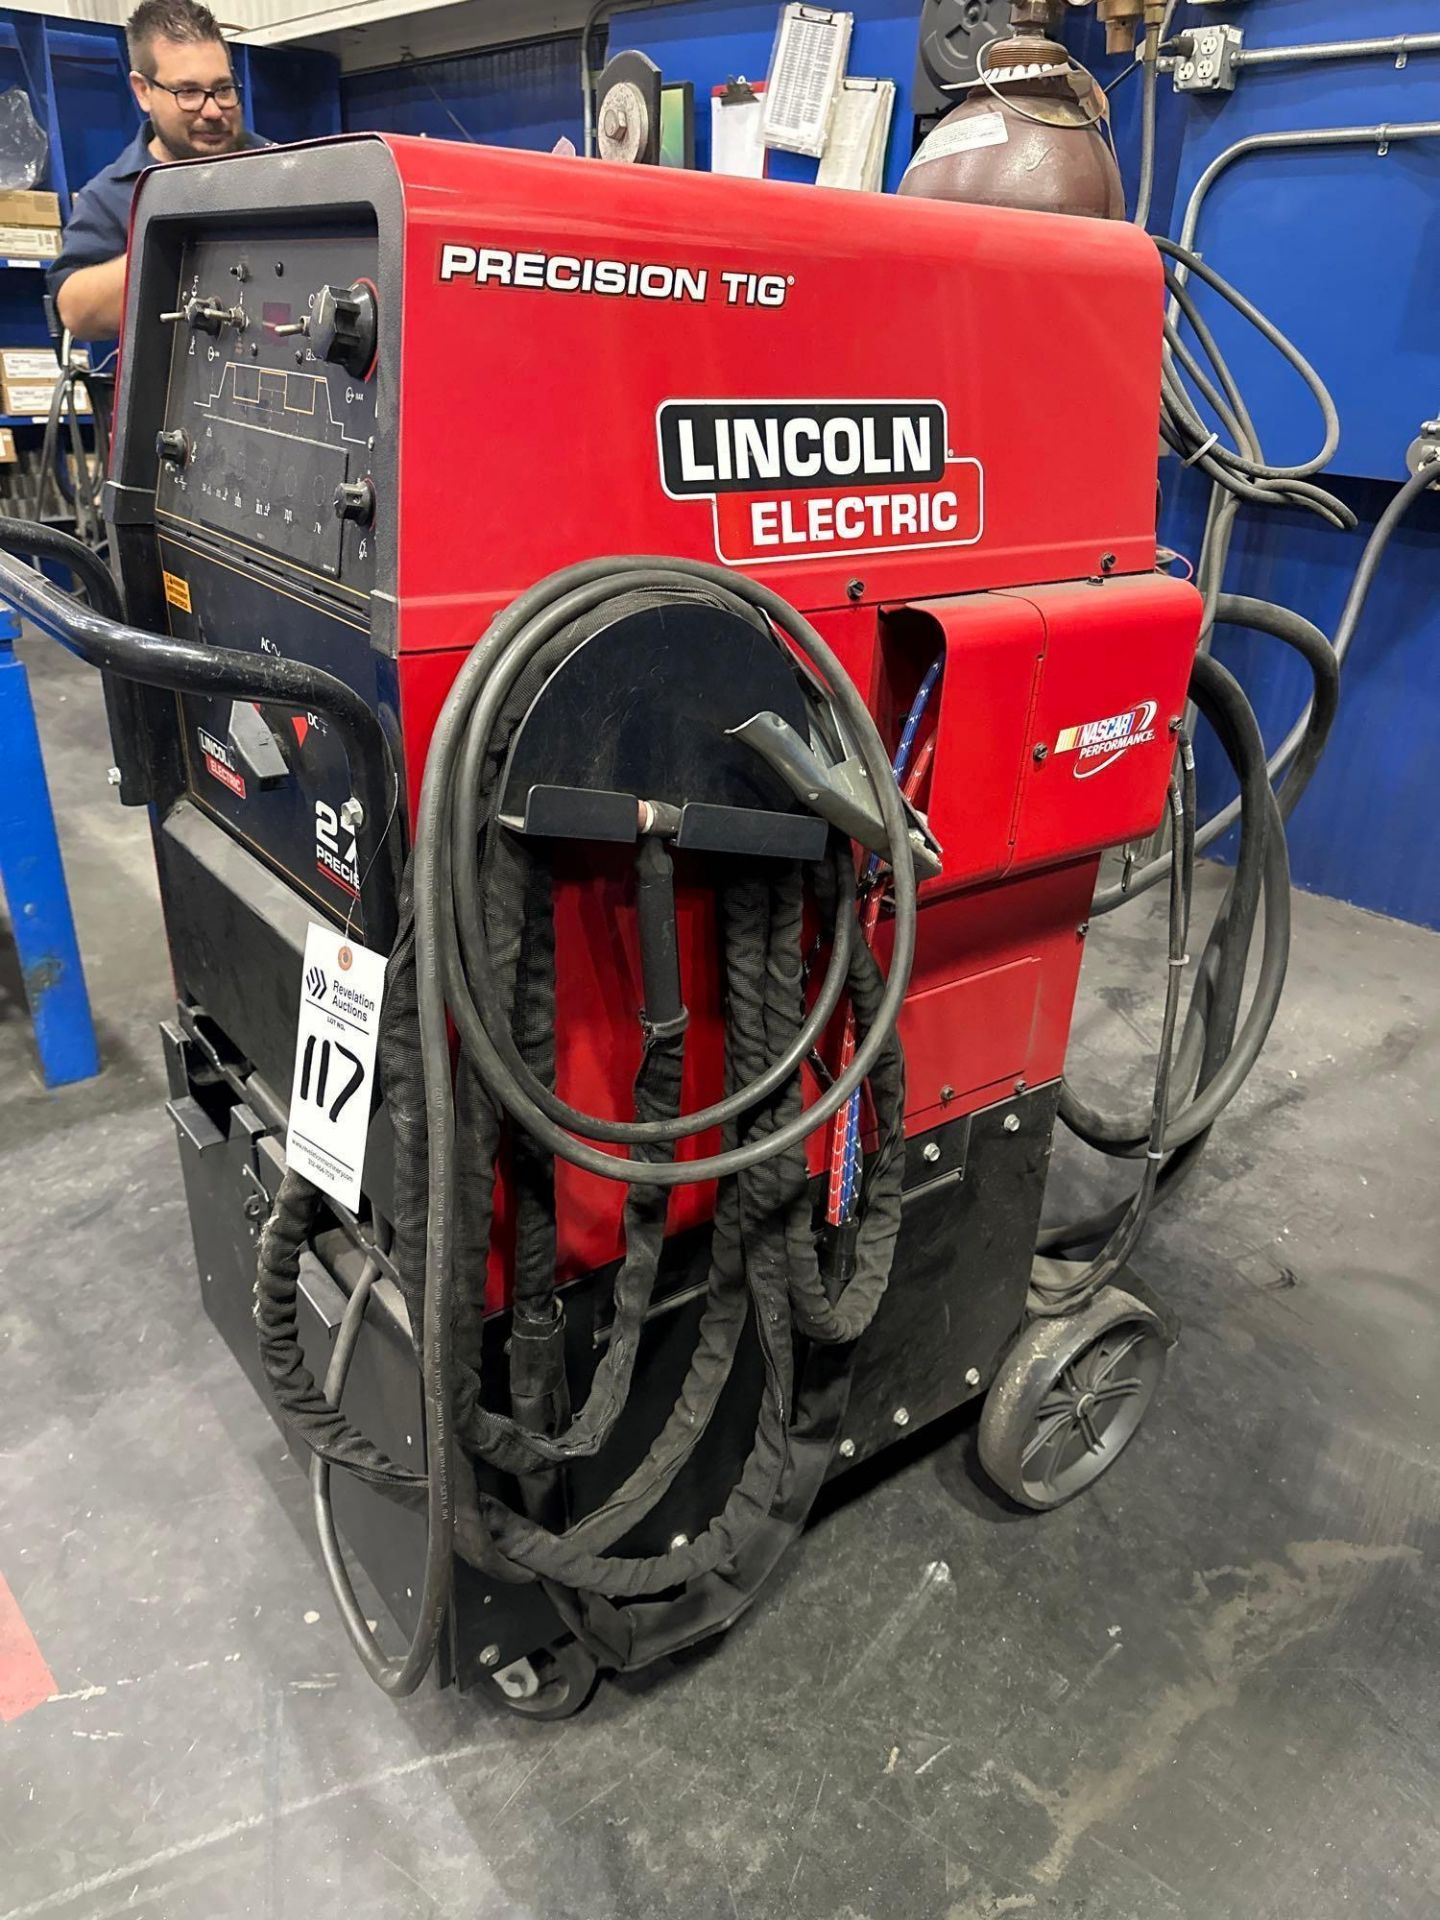 LINCOLN ELECTRIC 275 PRECISION TIG WELDER WITH ASSORTED WELDING RODS - Image 2 of 6